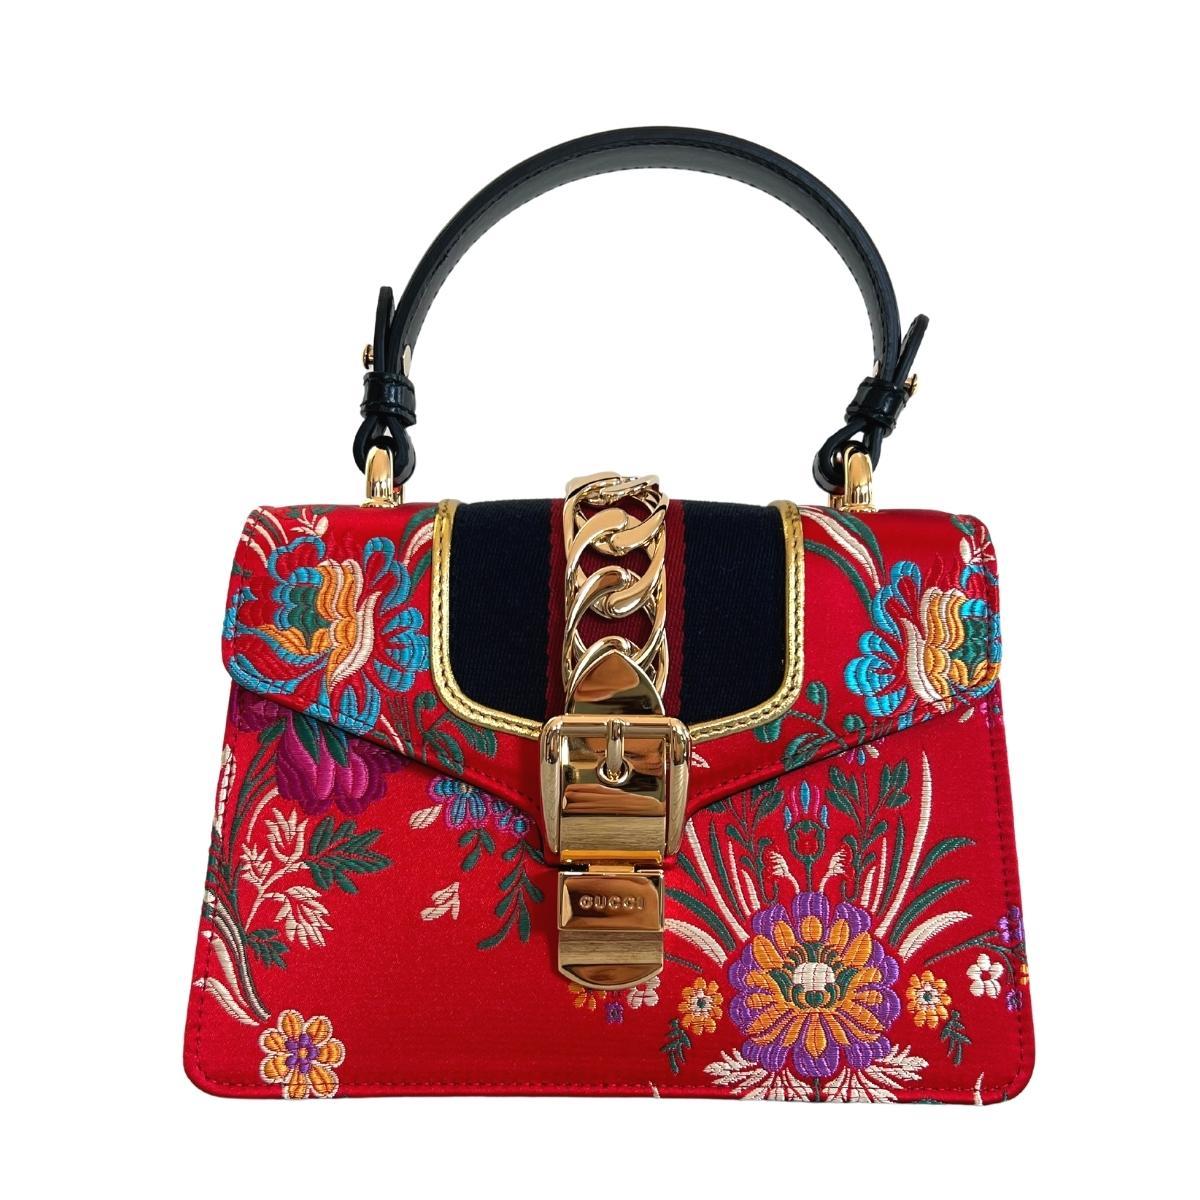 Red brocade Sylvie bag is crafted to a compact, structured shape with black leather trims, and detailed with all the house hallmarks: navy and red Web stripe, gold-tone metal chain, and logo-engraved buckle-effect clasp.
One leather top